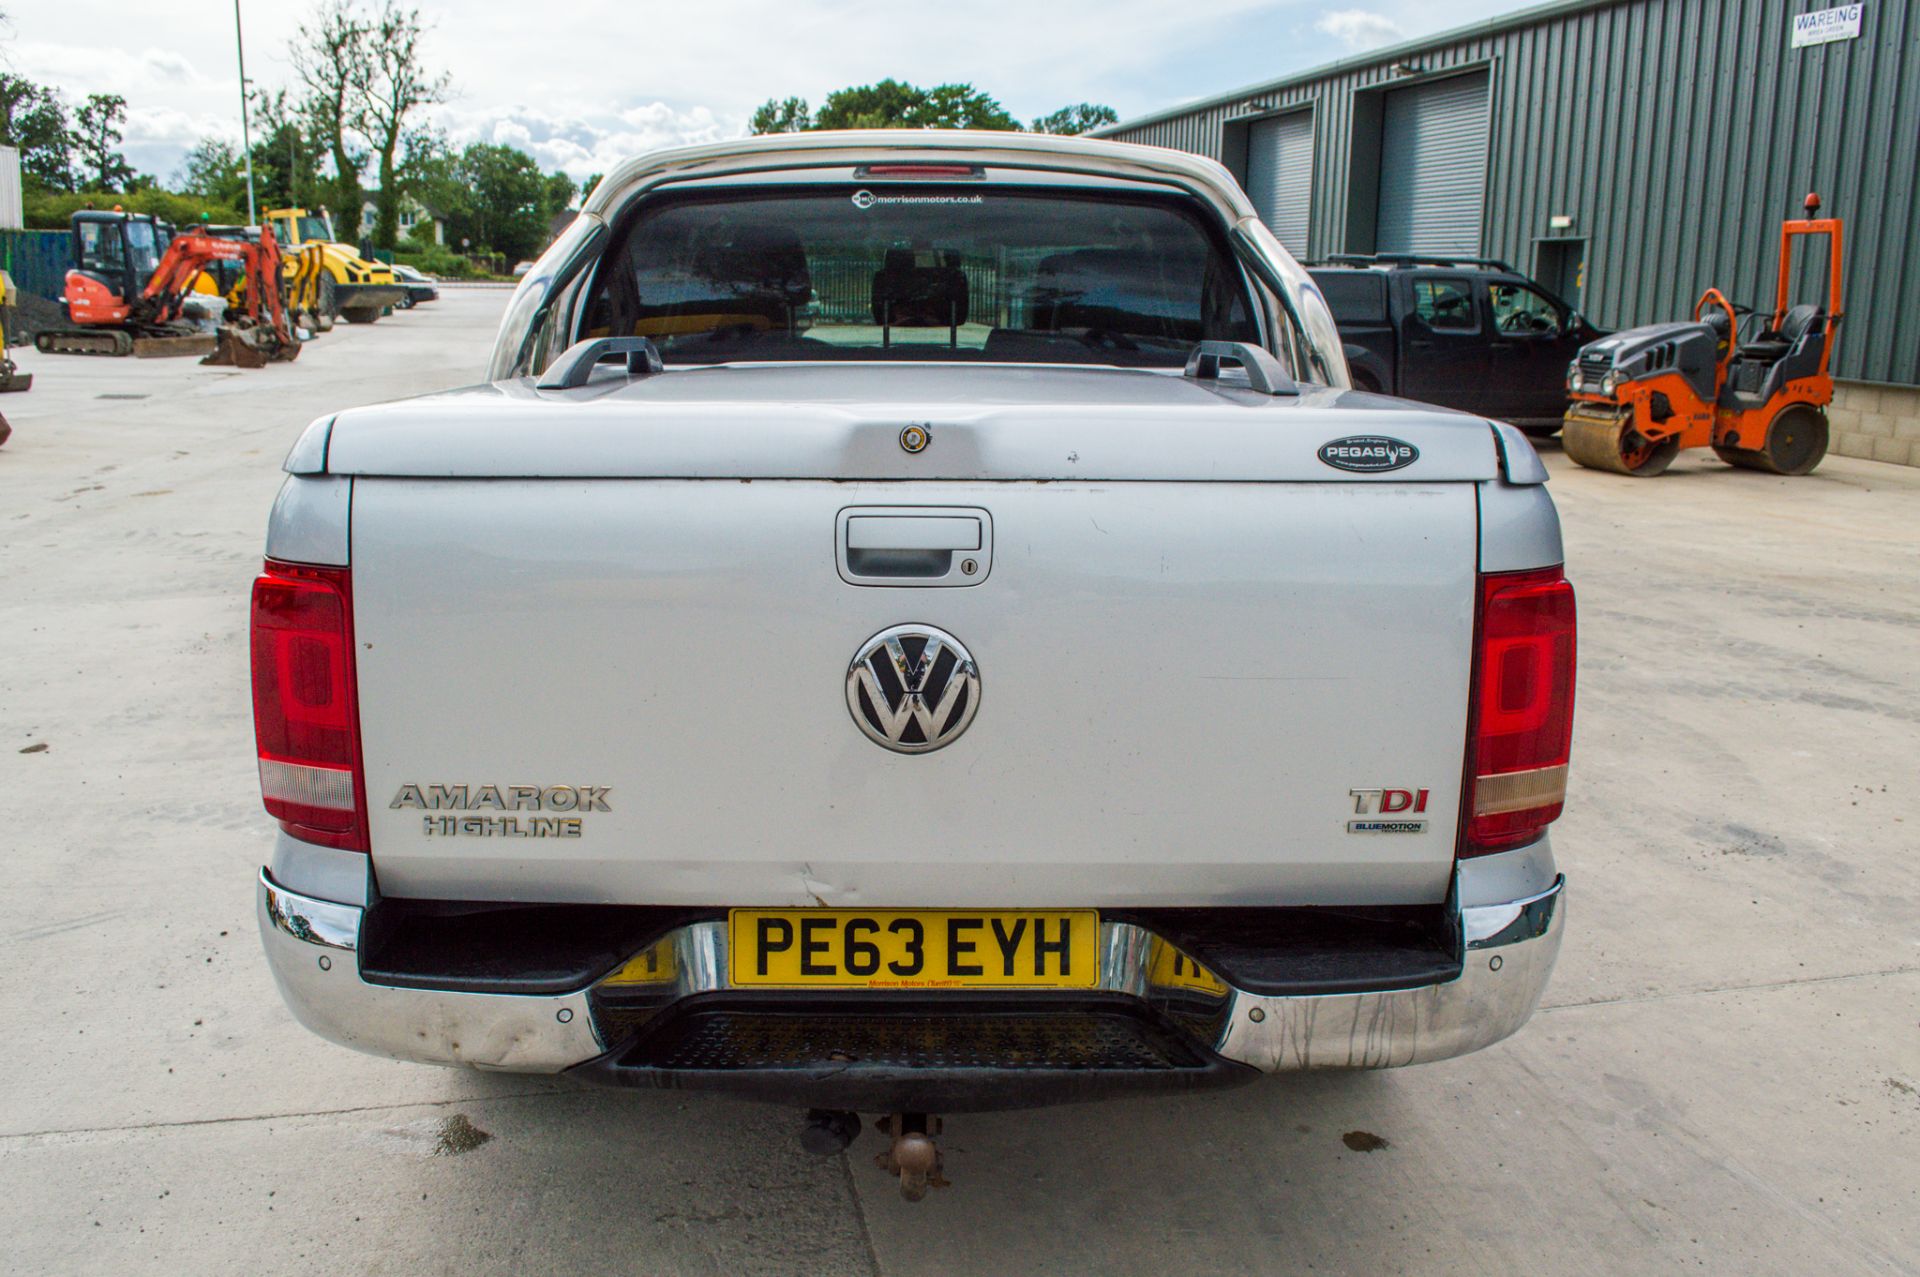 Volkswagen Amarok 2.0 TDI highline 4wd automatic double cab pick up Reg No: PE63 EYH Date of - Image 6 of 30